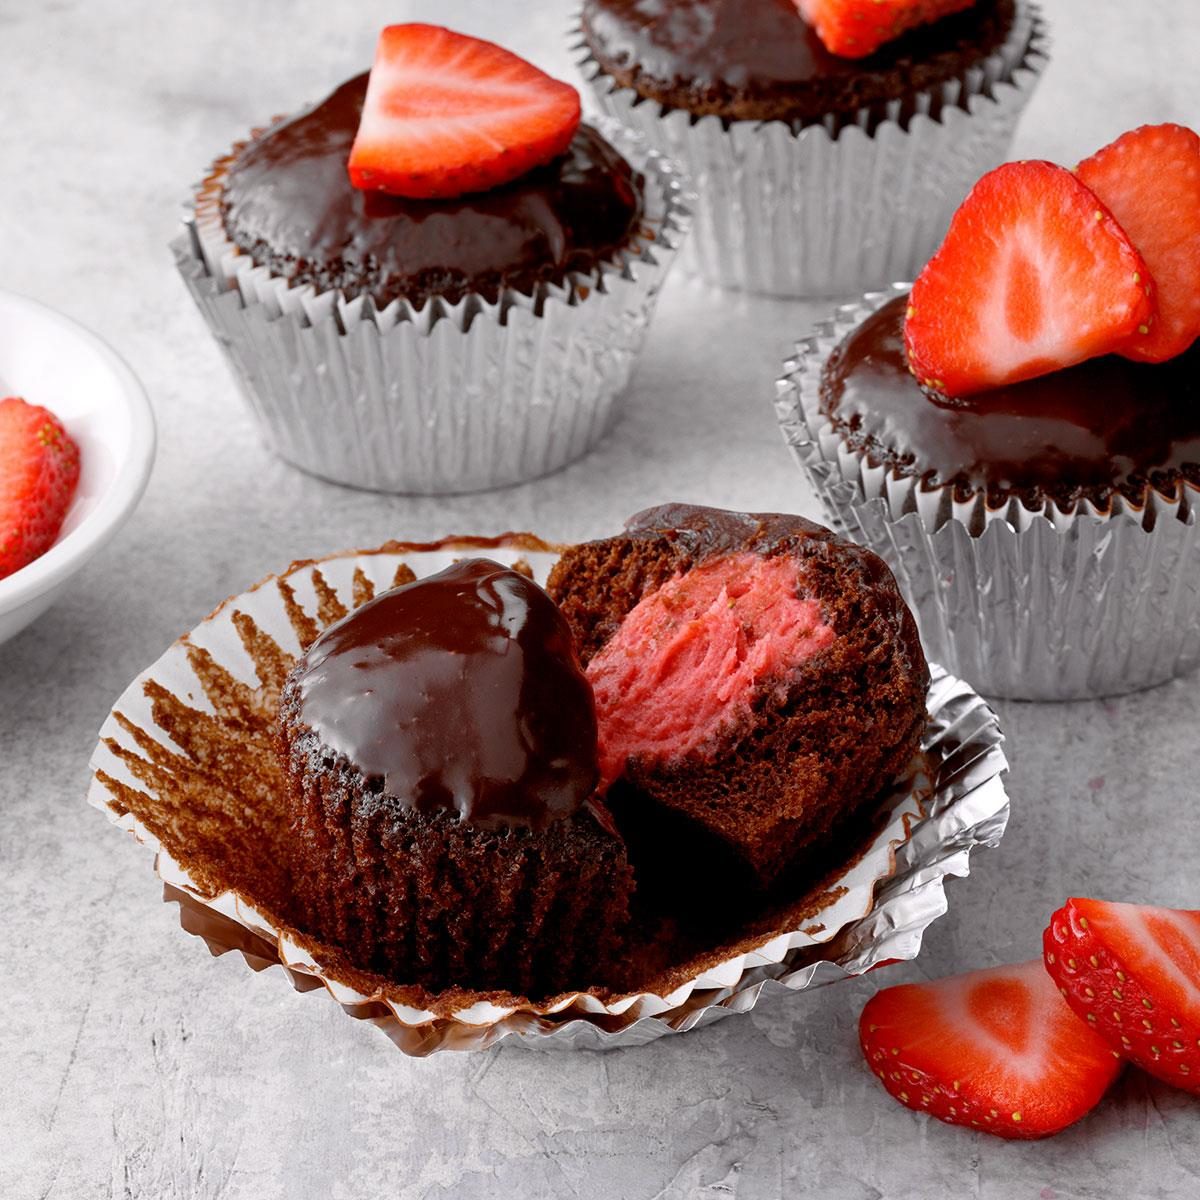 Chocolate Cupcakes With Strawberry Filling Exps Rc22 269830 Dr 09 28 2b Rms